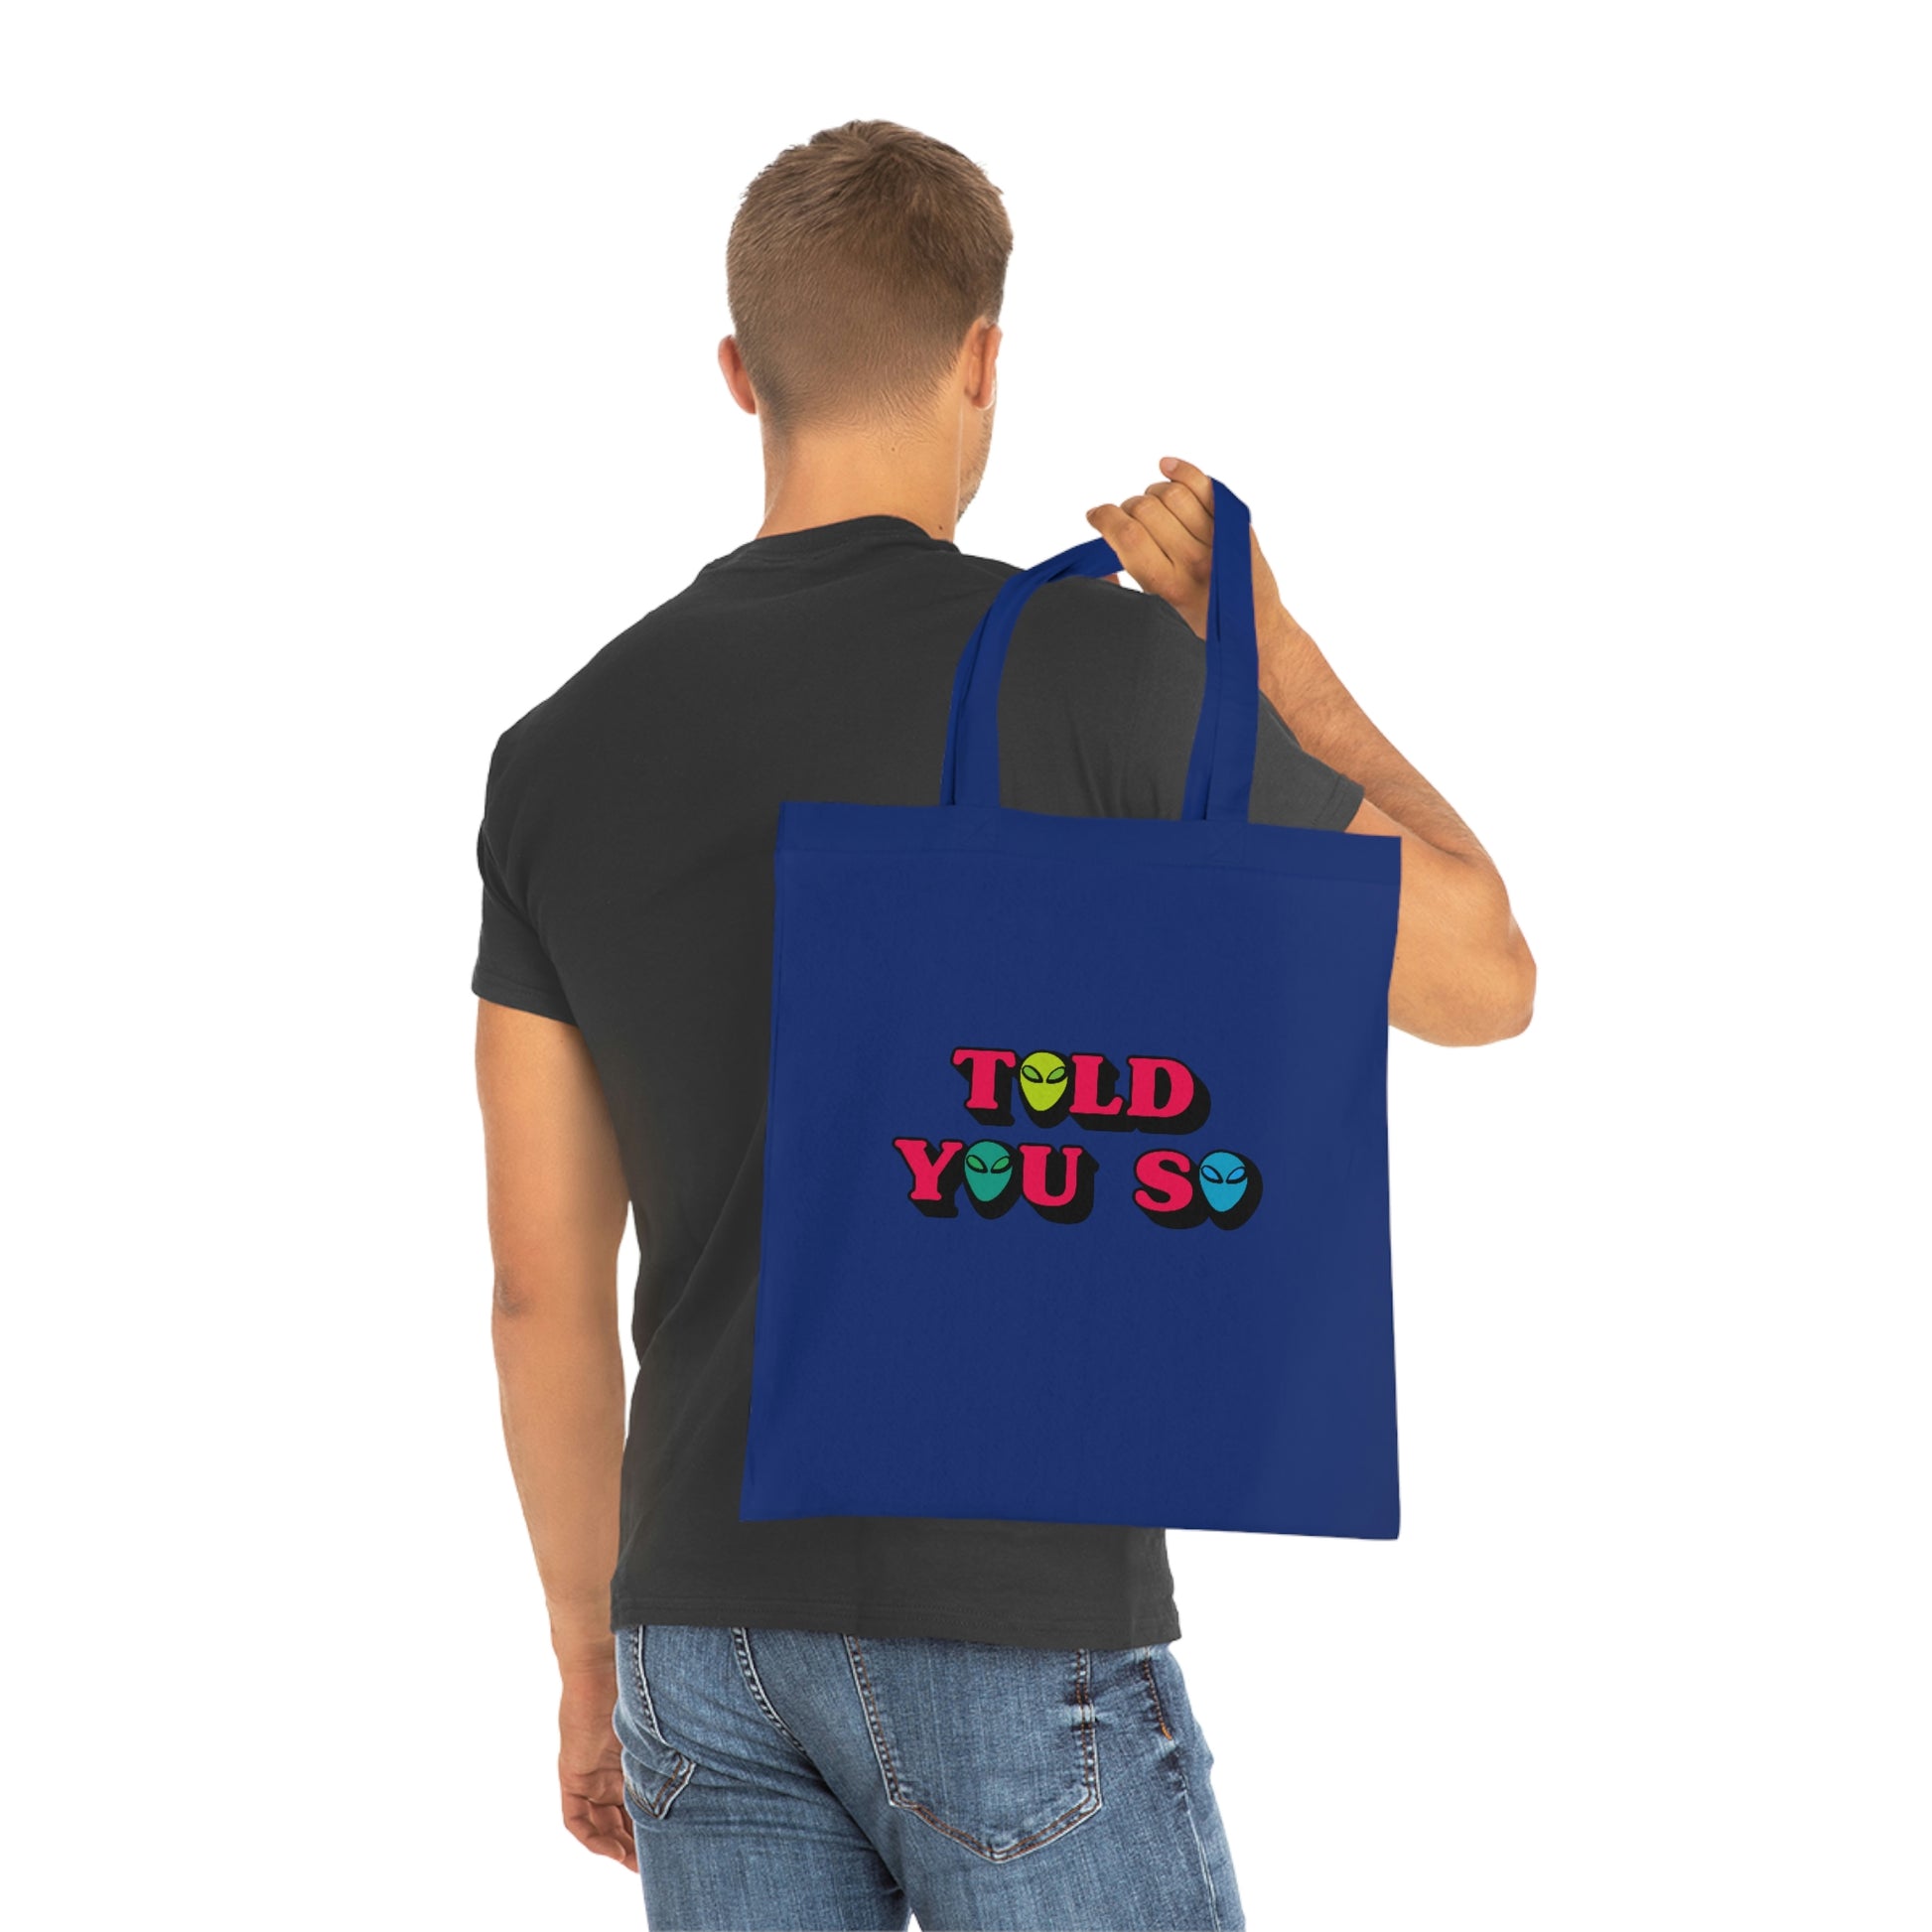 Weirdo | Cotton shopping bag for you weird people who think that the aliens are already amongst us! This royal blue shopping bag has the funny meme: TOLD YOU SO written on the front of the bag.